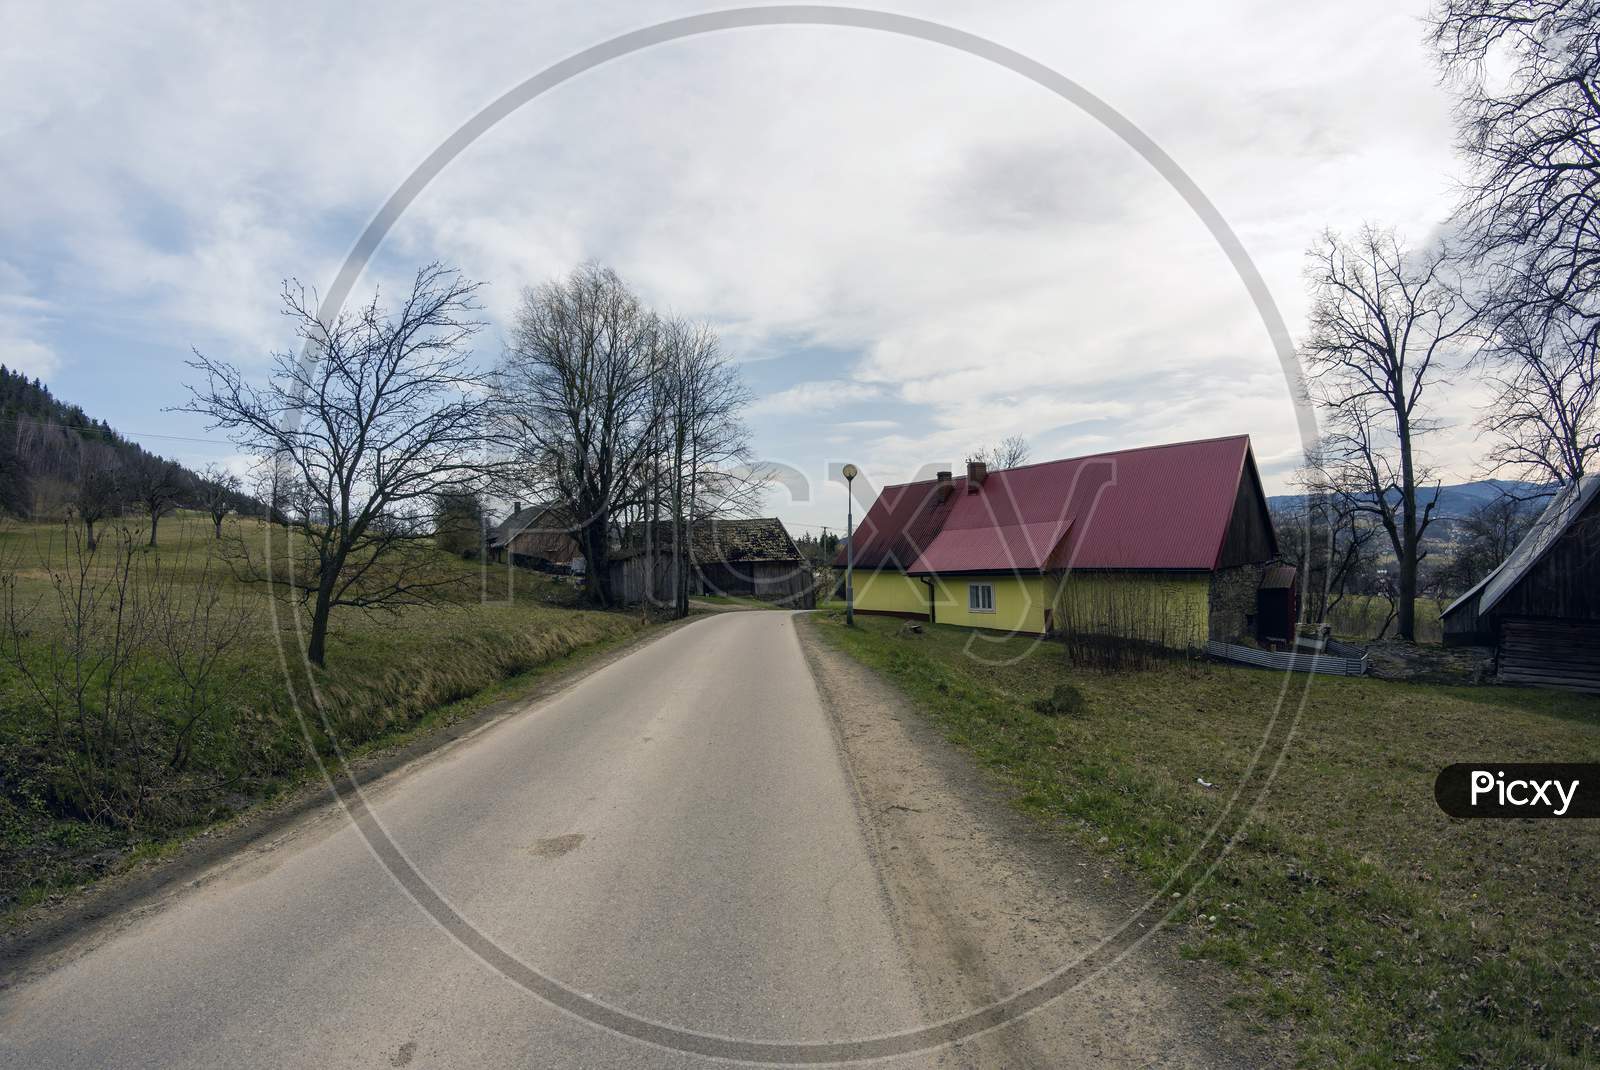 Limanowa, South Poland - April 01, 2021: View Of Country Side Showing Turning Narrow Road With House And Trees Located In Lysa Gora Beskid Wyspowy In The Polish Mountains